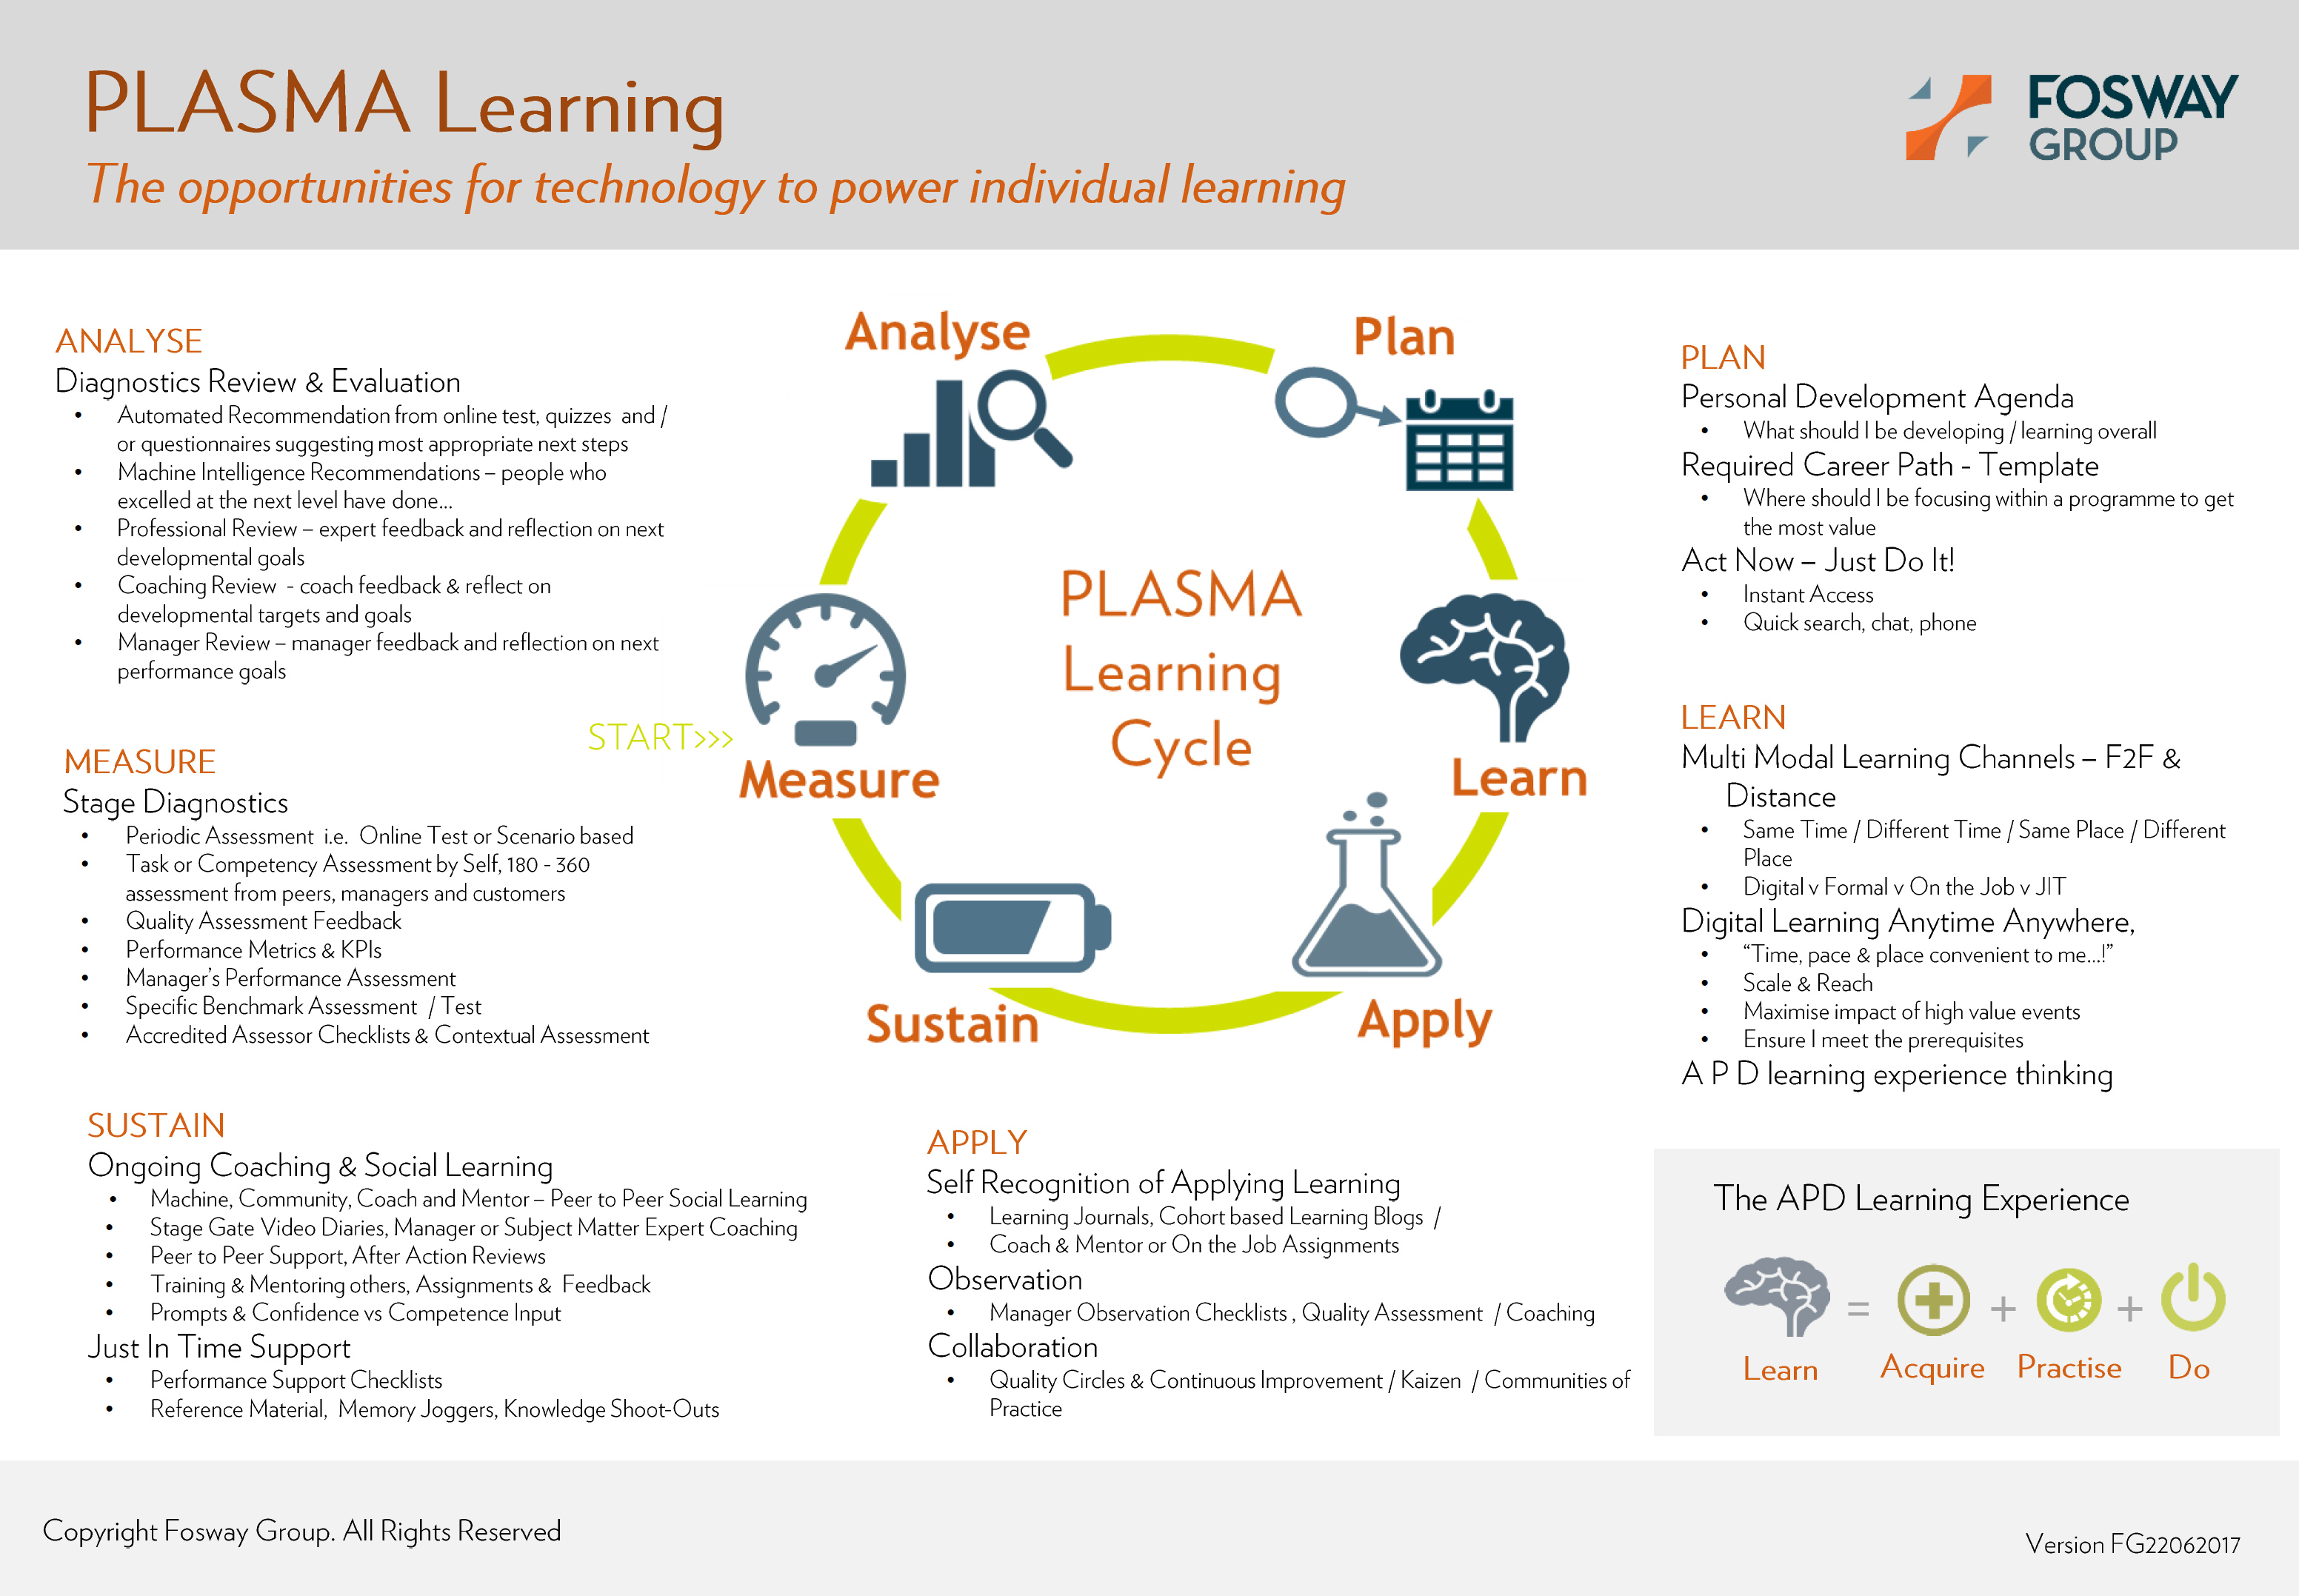 PLASMA Learning Cycle | Fosway Group, Europe's number one HR ...